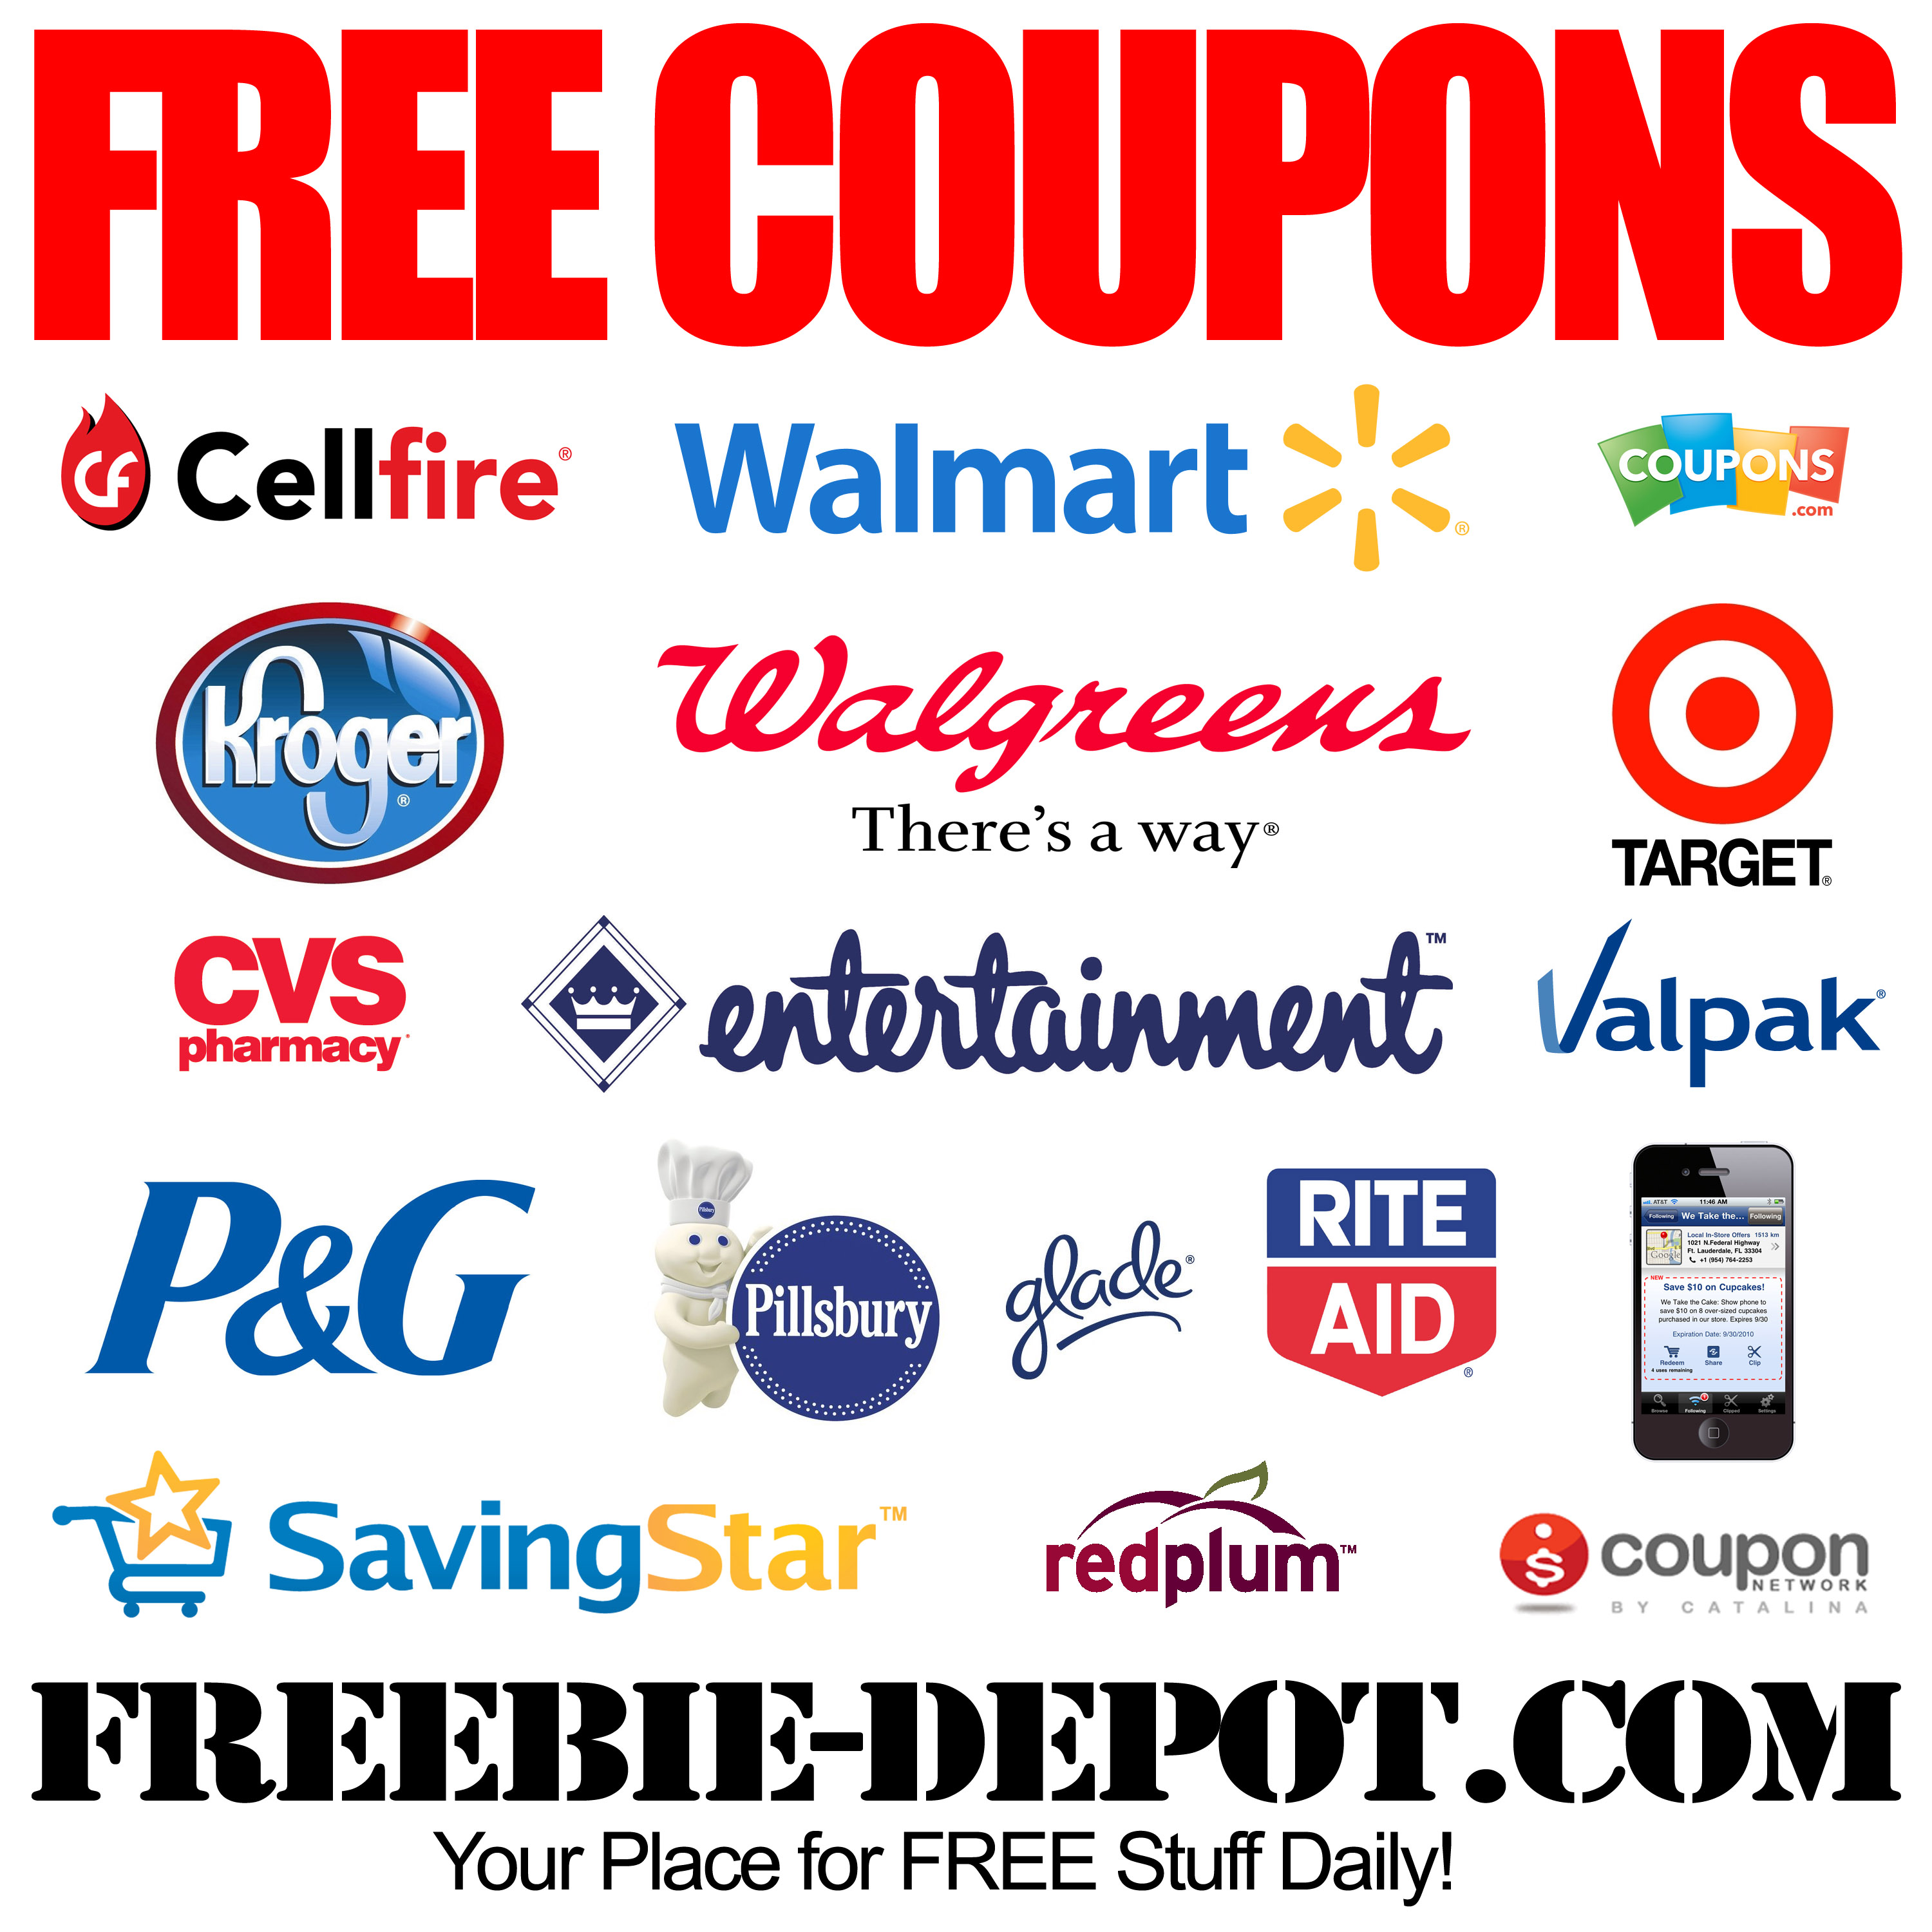 FREE Coupons | FREE Grocery Coupons | FREE Local Coupons | FREE